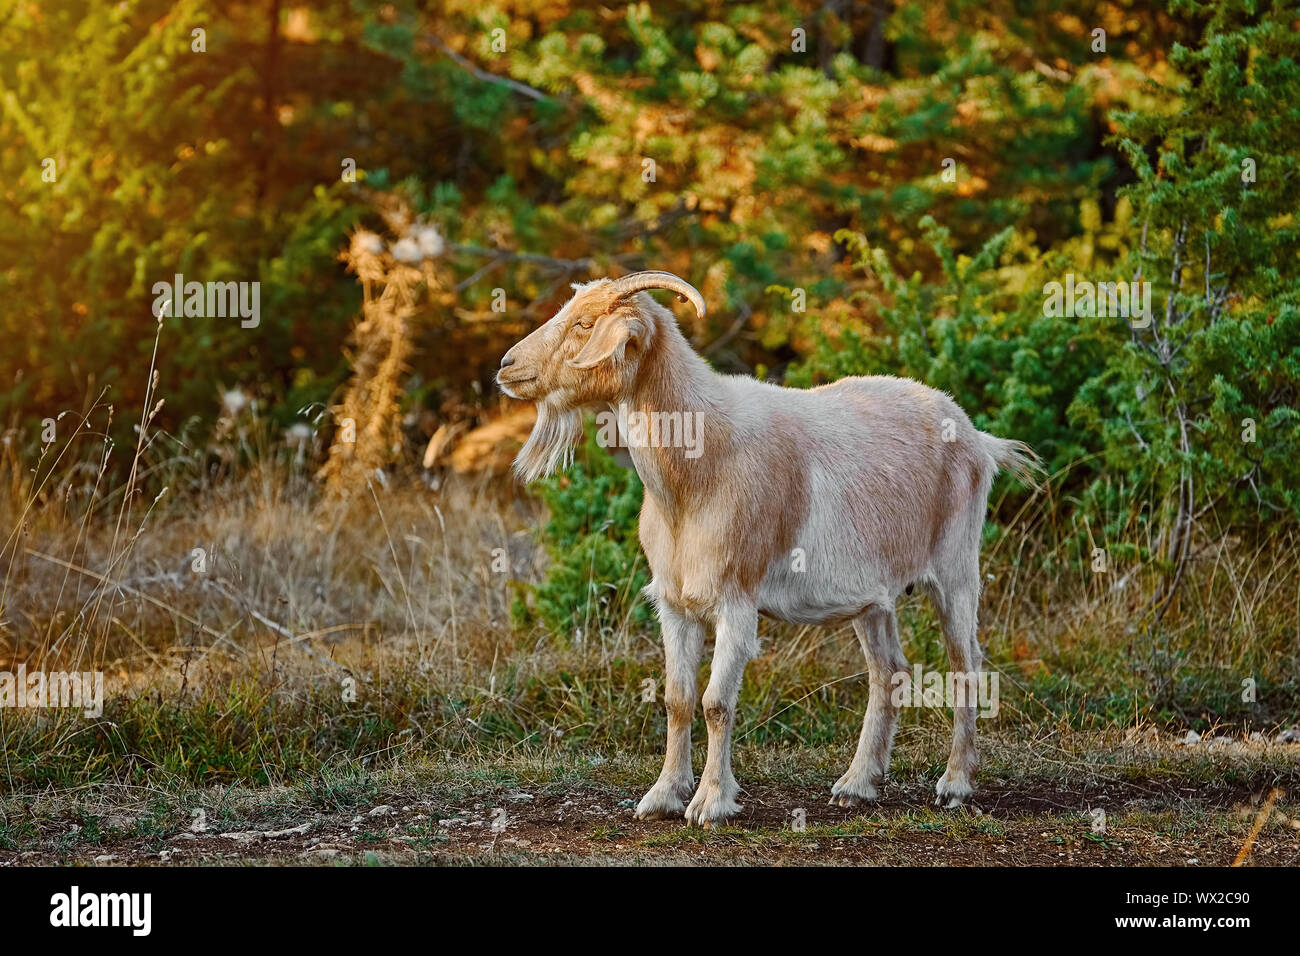 Goat with Horns Stock Photo